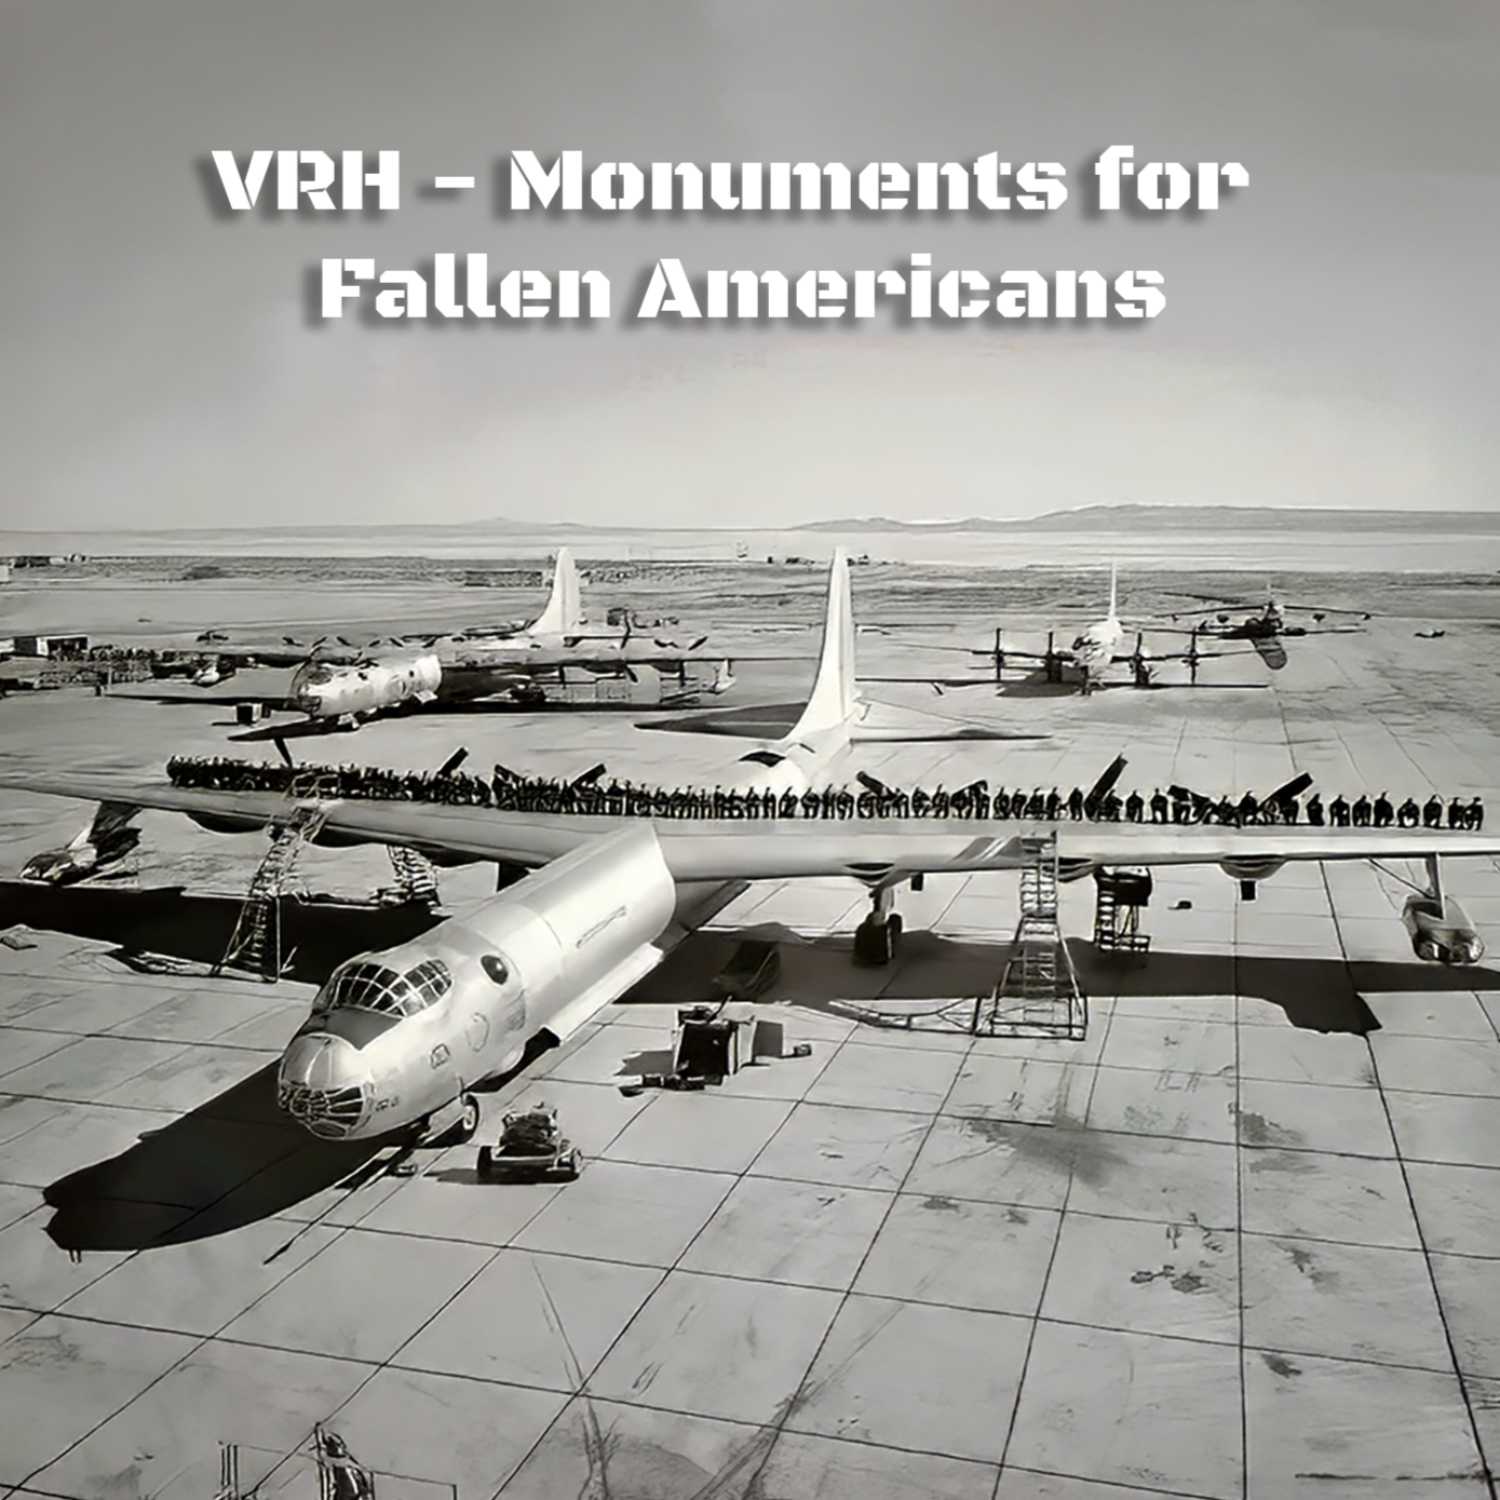 VRH - Monuments for Fallen Americans - aired Nov 3, 2002